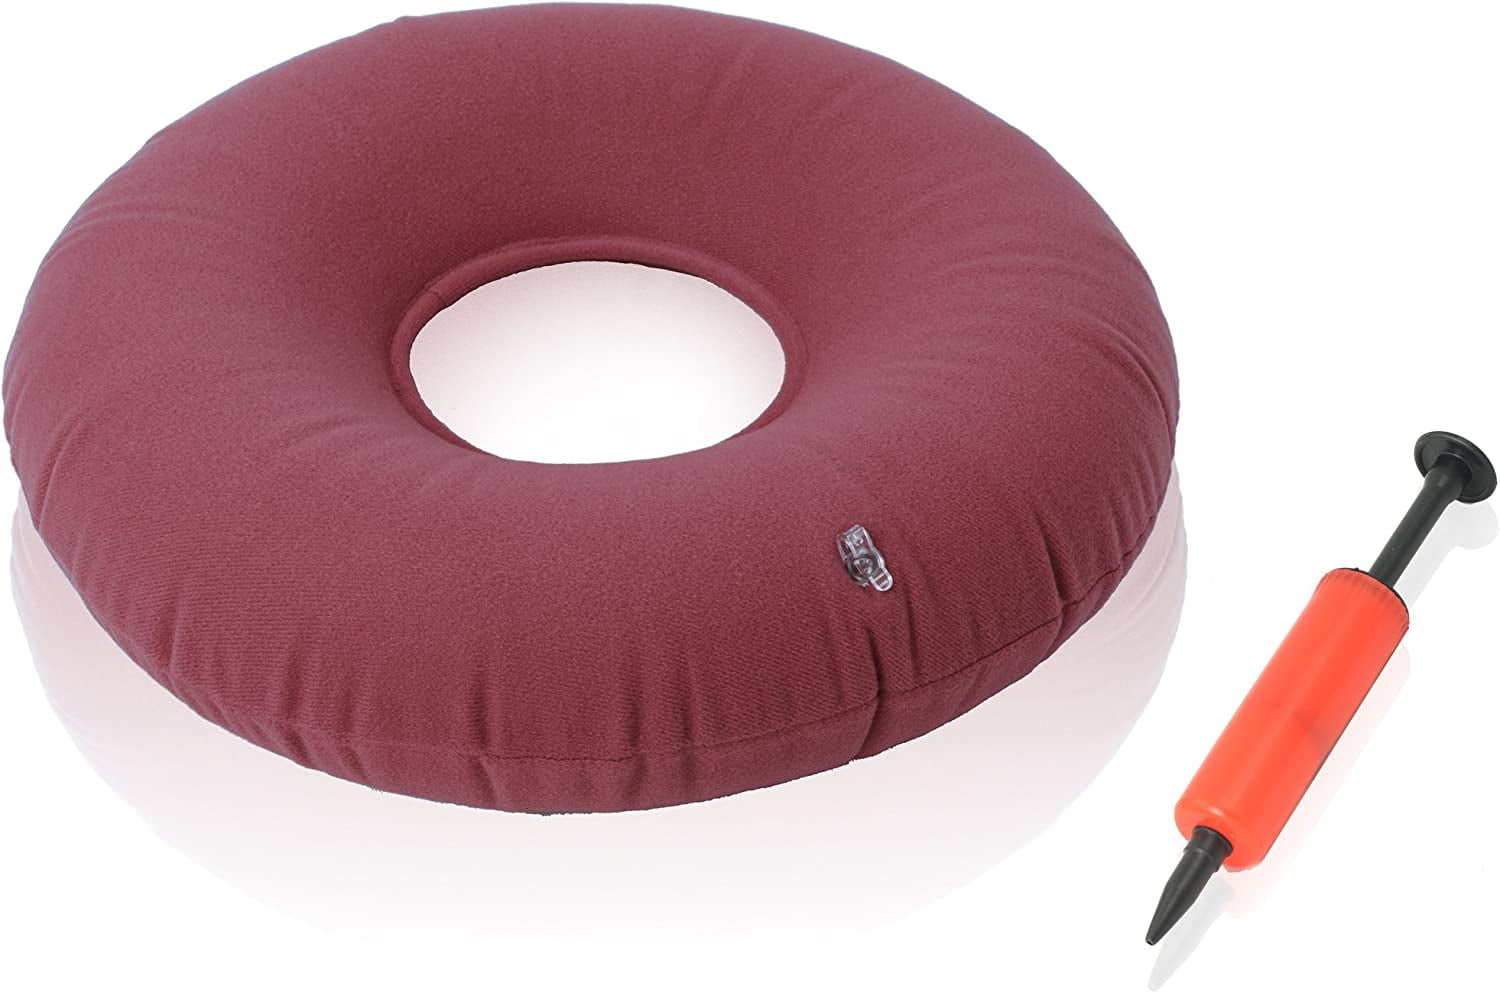 2 Pack Donut Pillow for Tailbone Pain, Inflatable Donut Cushion Seat with A  Pump, Hemorrhoid Seat Cushion, Round Wheelchairs Seat Cushion for Home